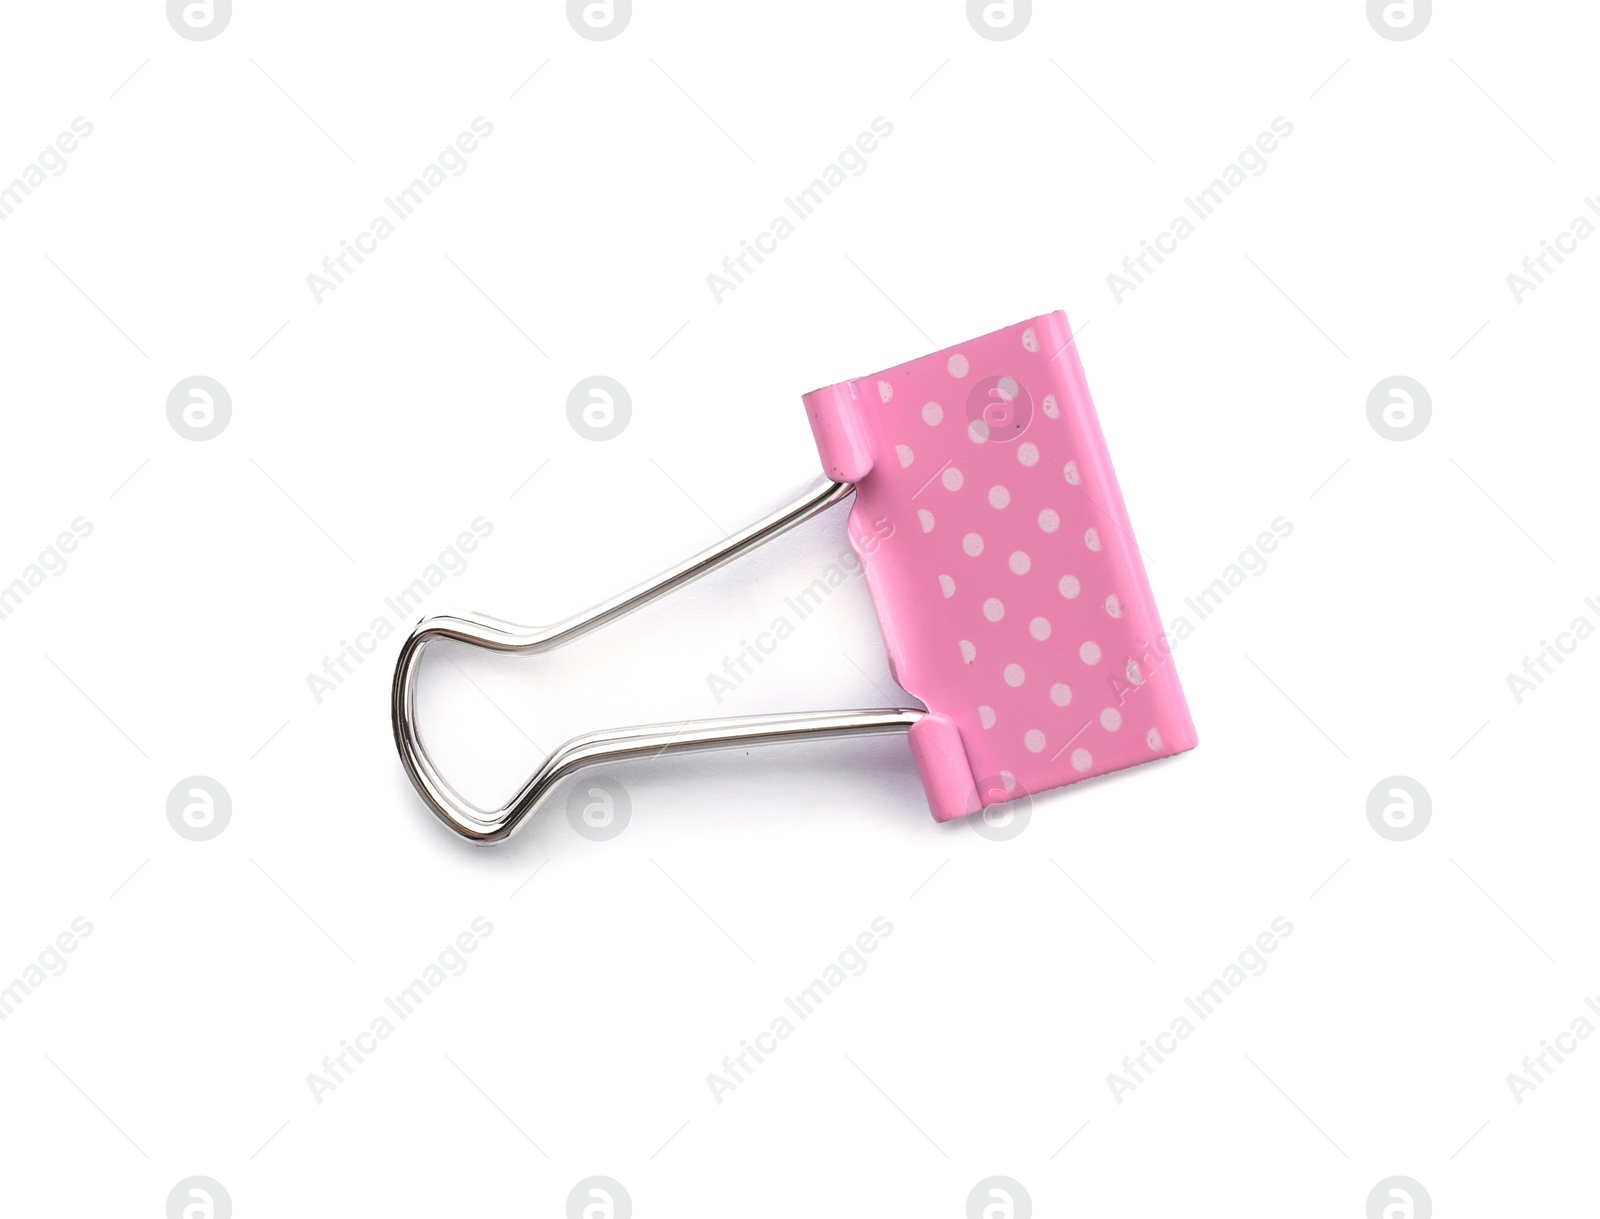 Photo of Pink binder clip on white background. Stationery for school